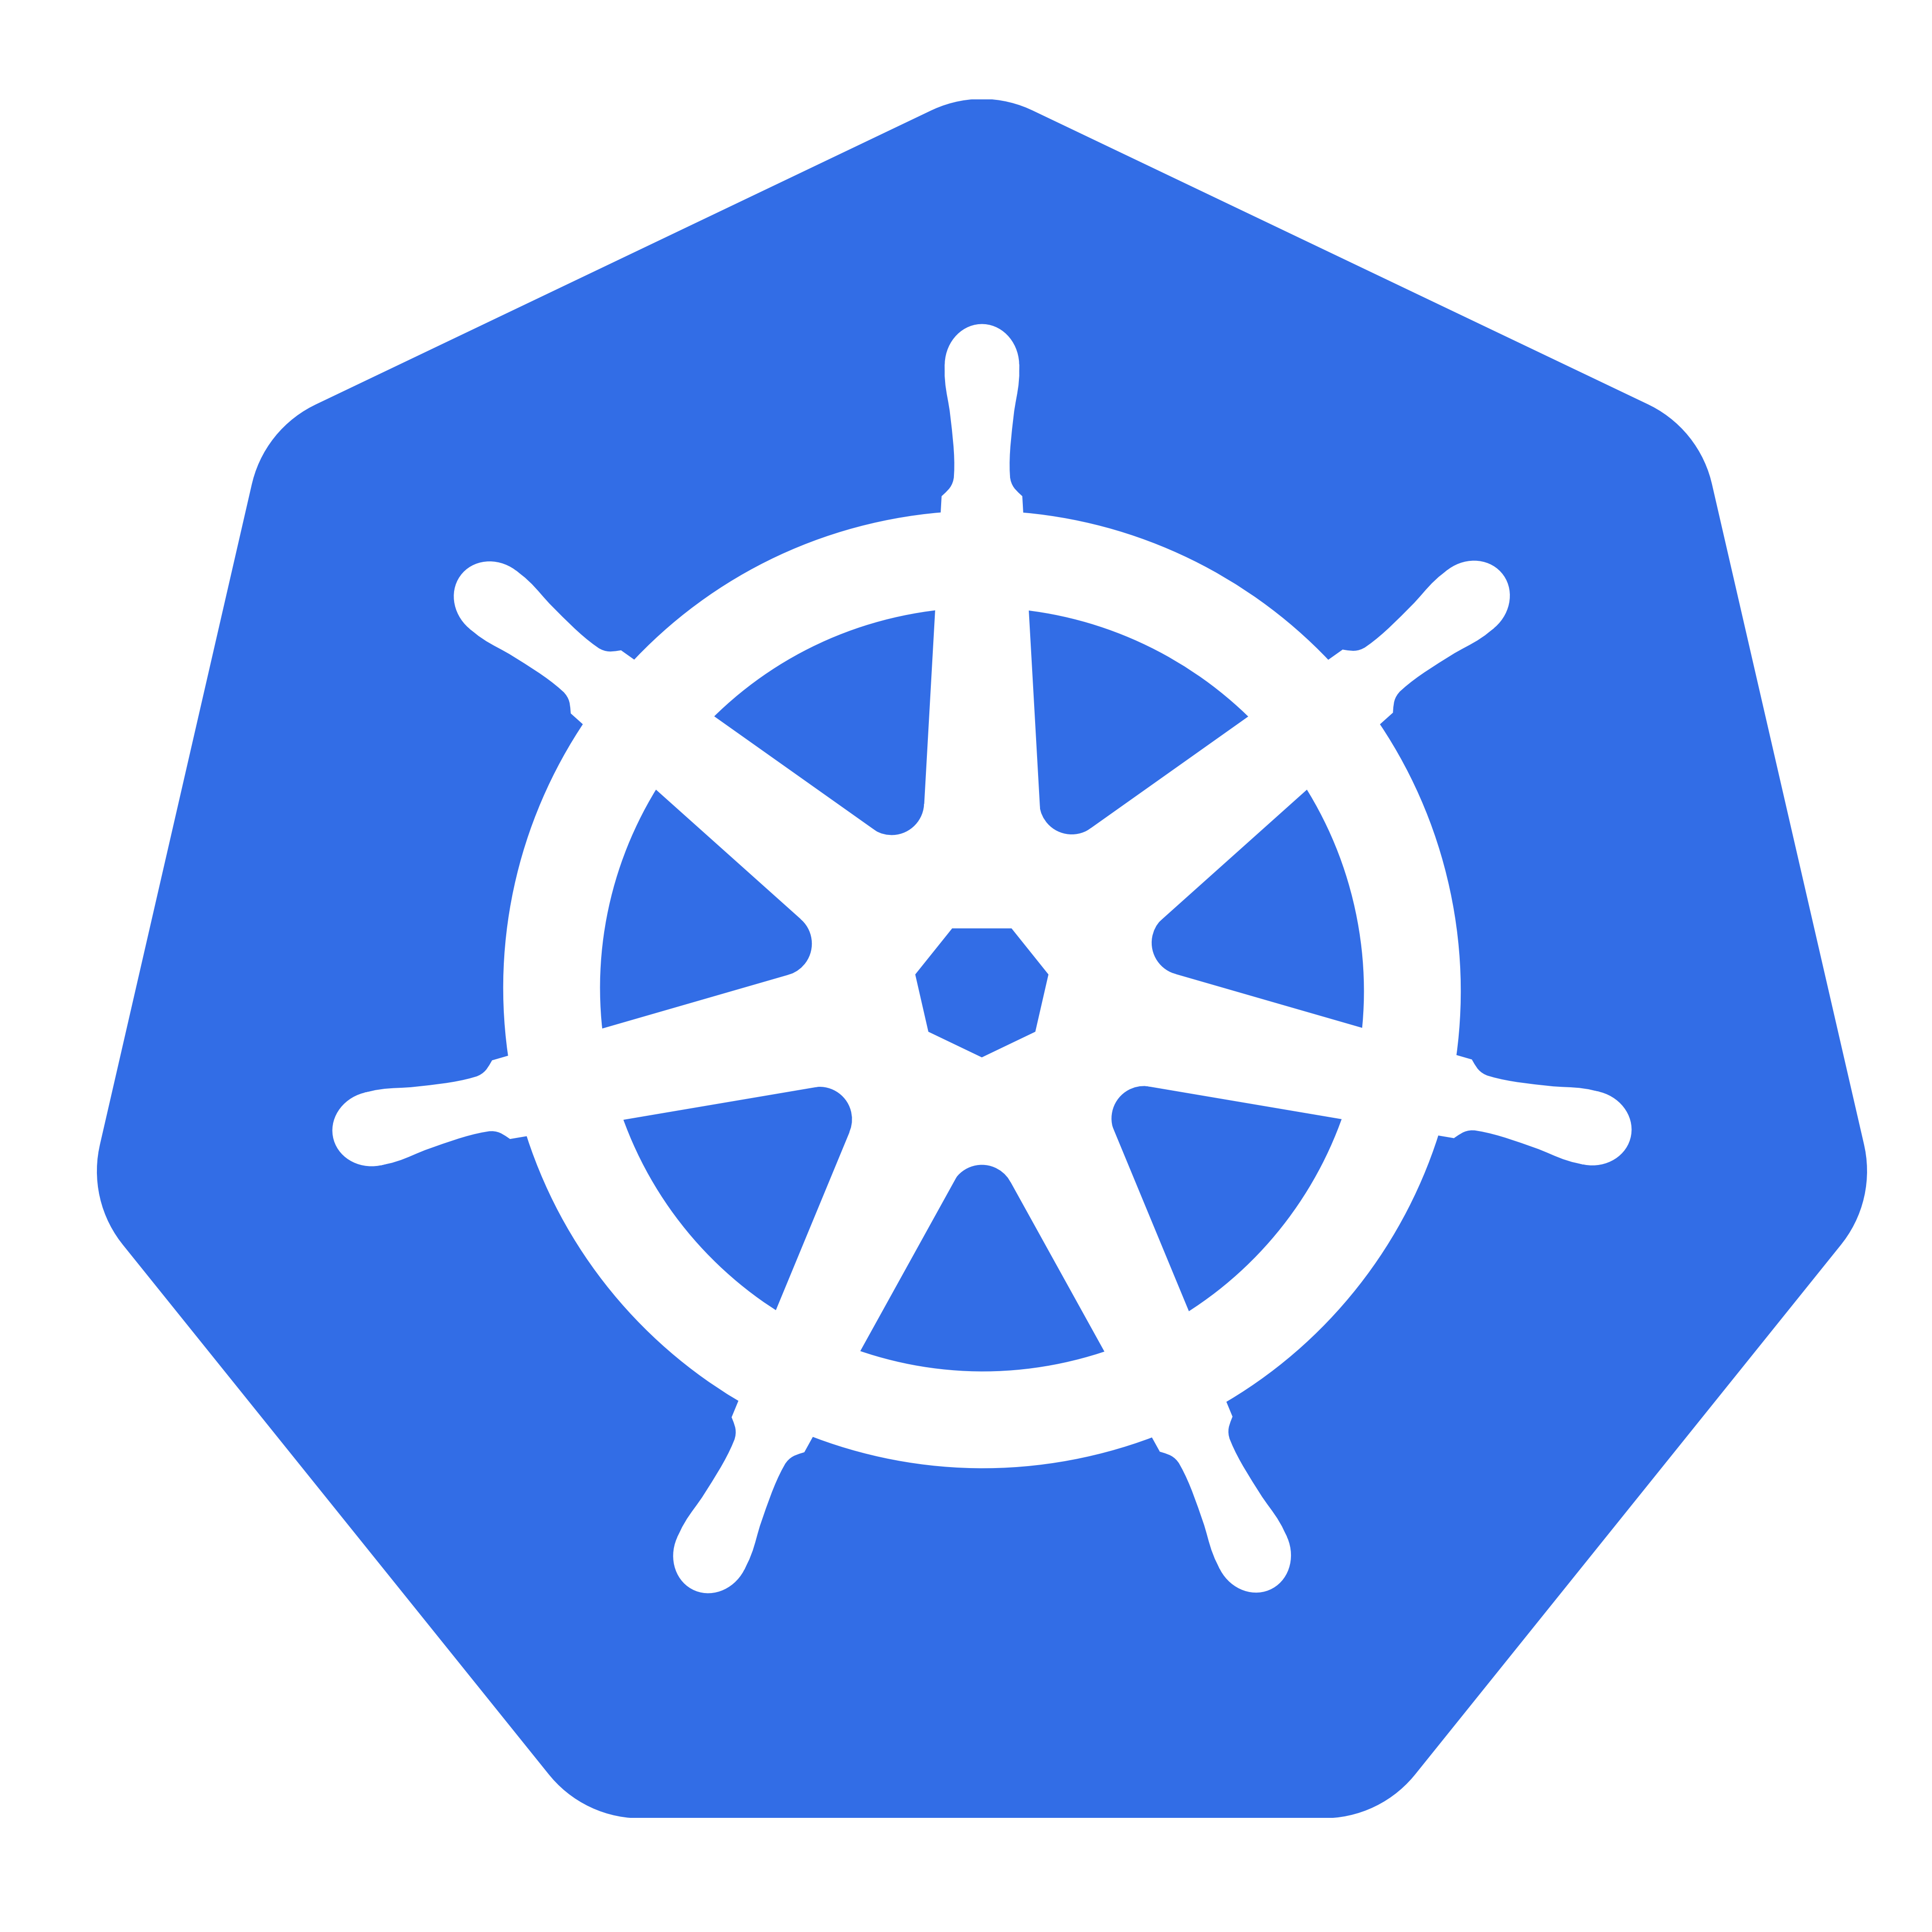 #Kubernetes: open source production-grade container orchestration management. #CNCF #K8s